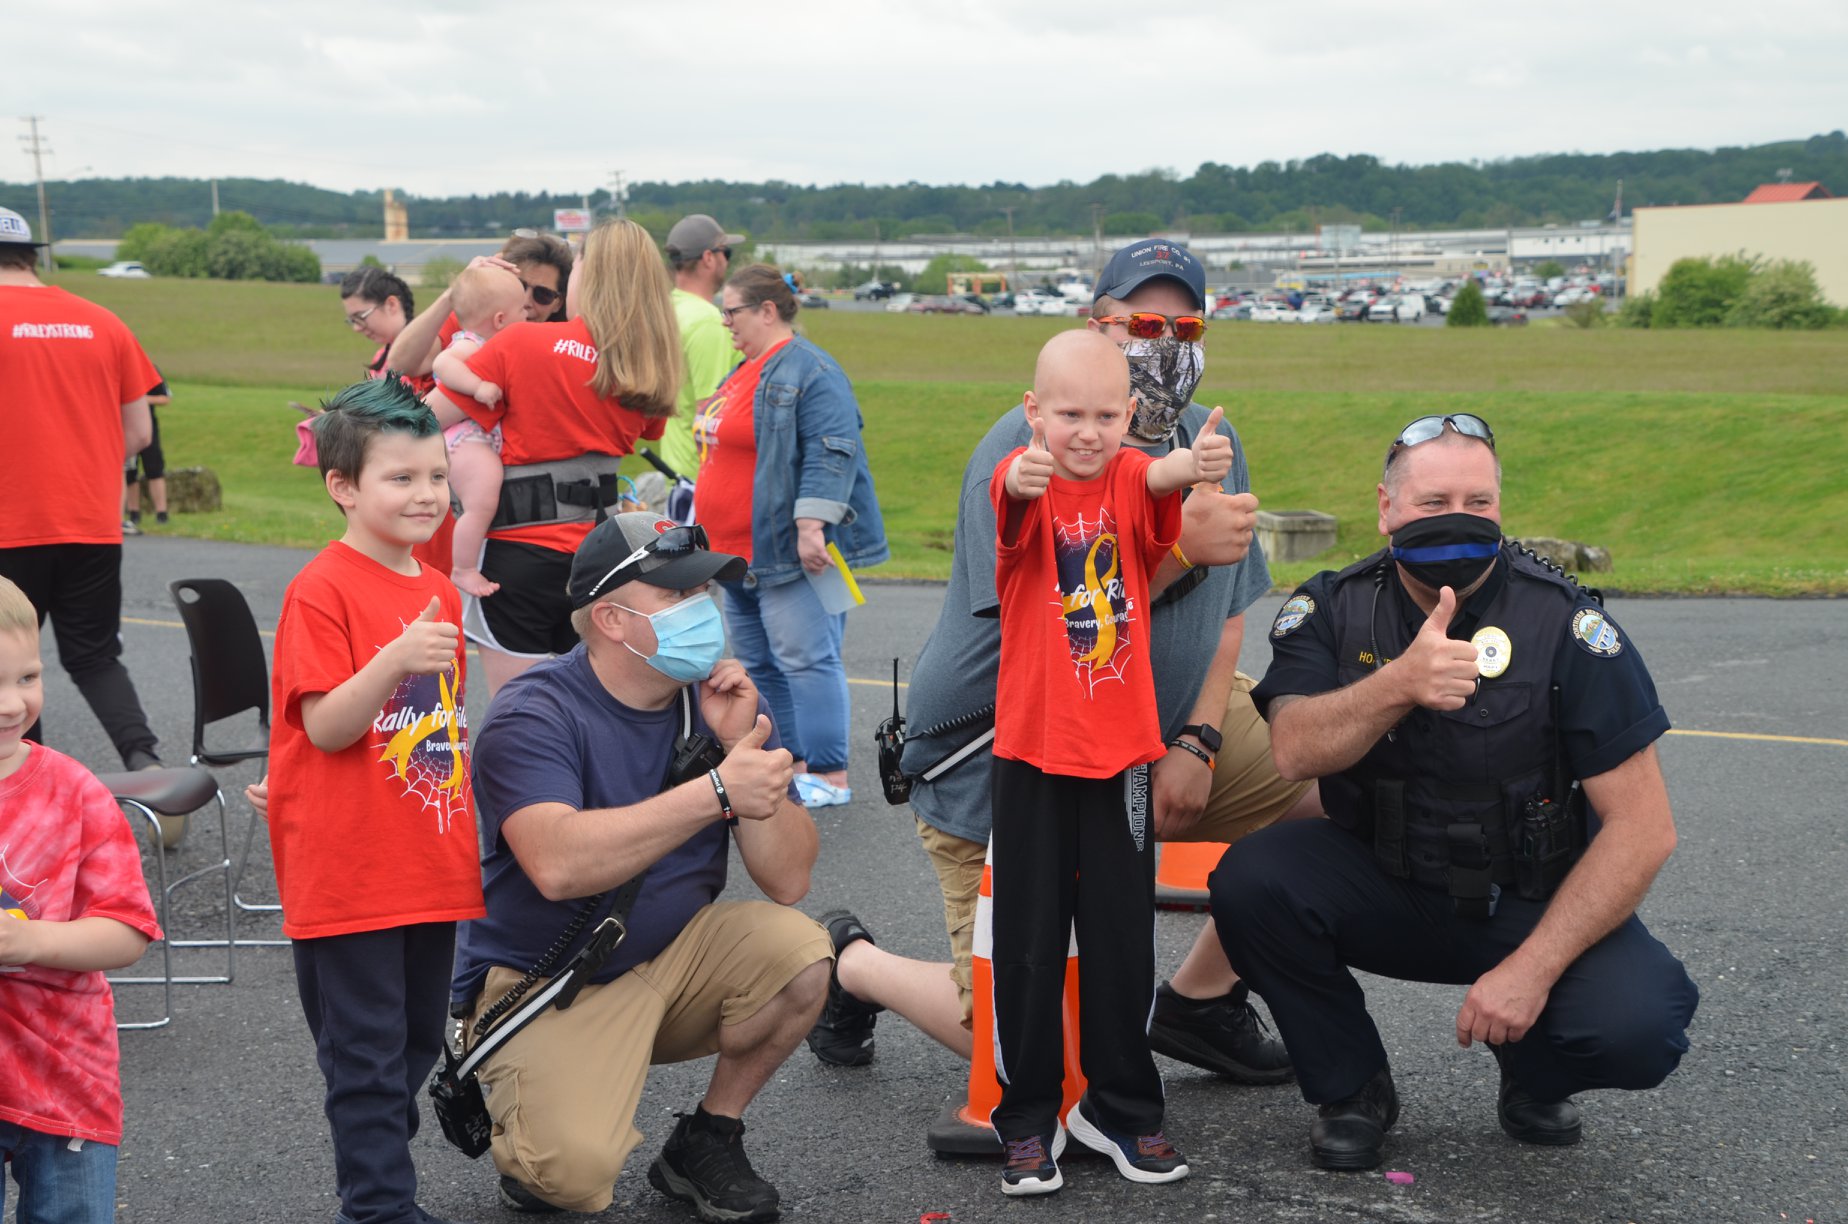 PHOTO: Riley Rejniak waved as a total of 651 of cars, motorcycles and first responders arrived in waves in Leesport, Pennsylvania, at a safe distance to celebrate his fighting spirit and 8th birthday on May 23. Riley is fighting cancer a second time.